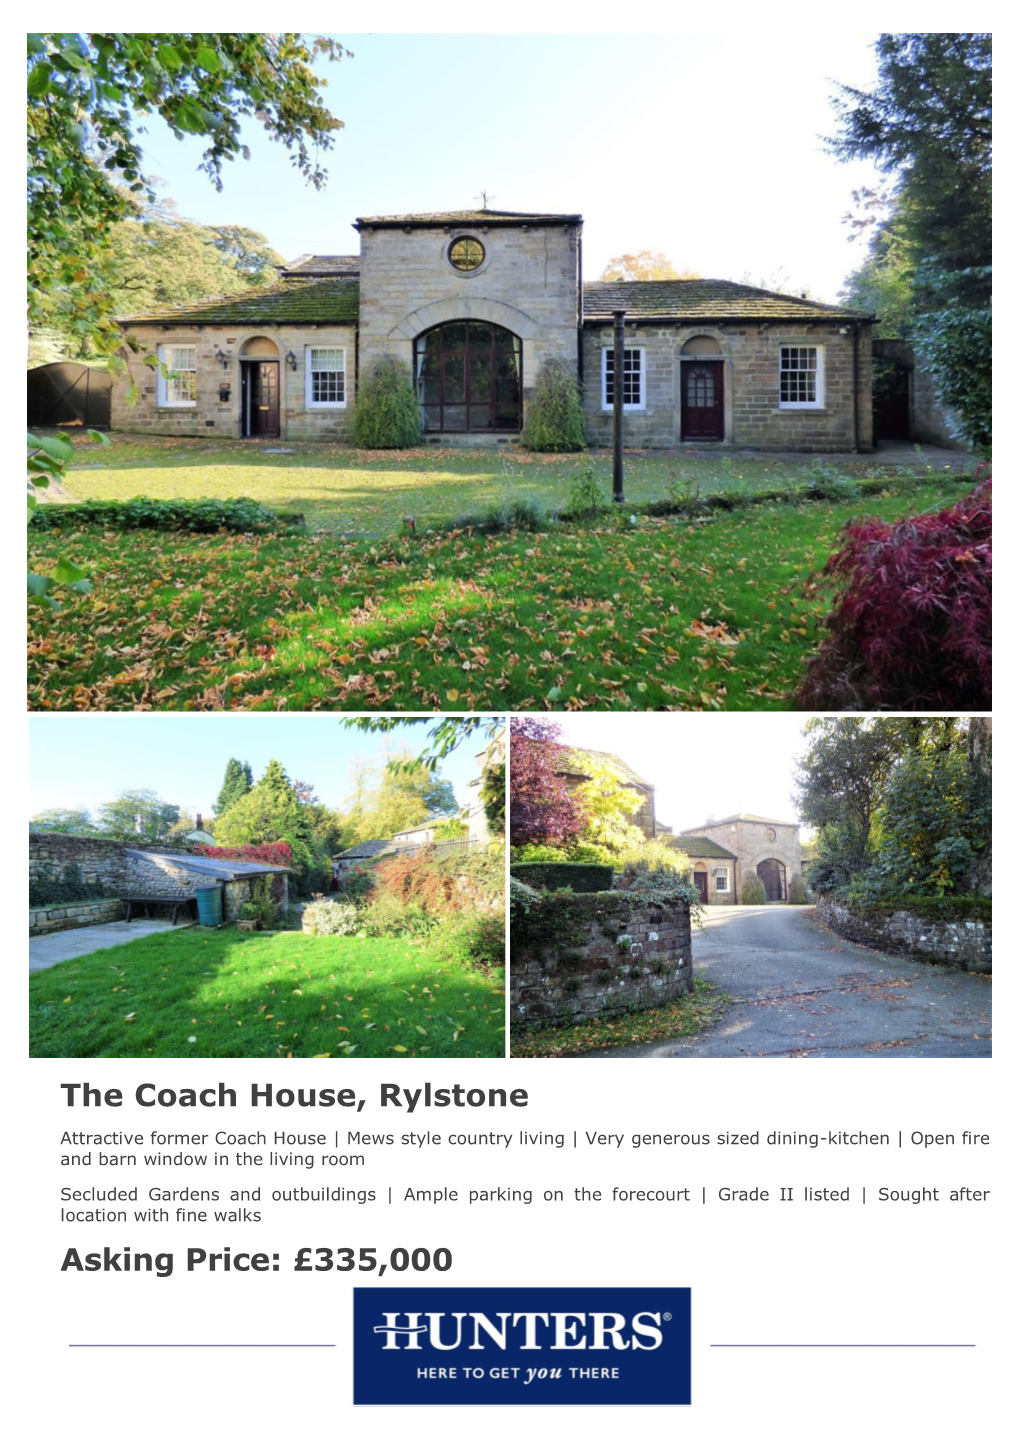 The Coach House, Rylstone Asking Price: £335,000